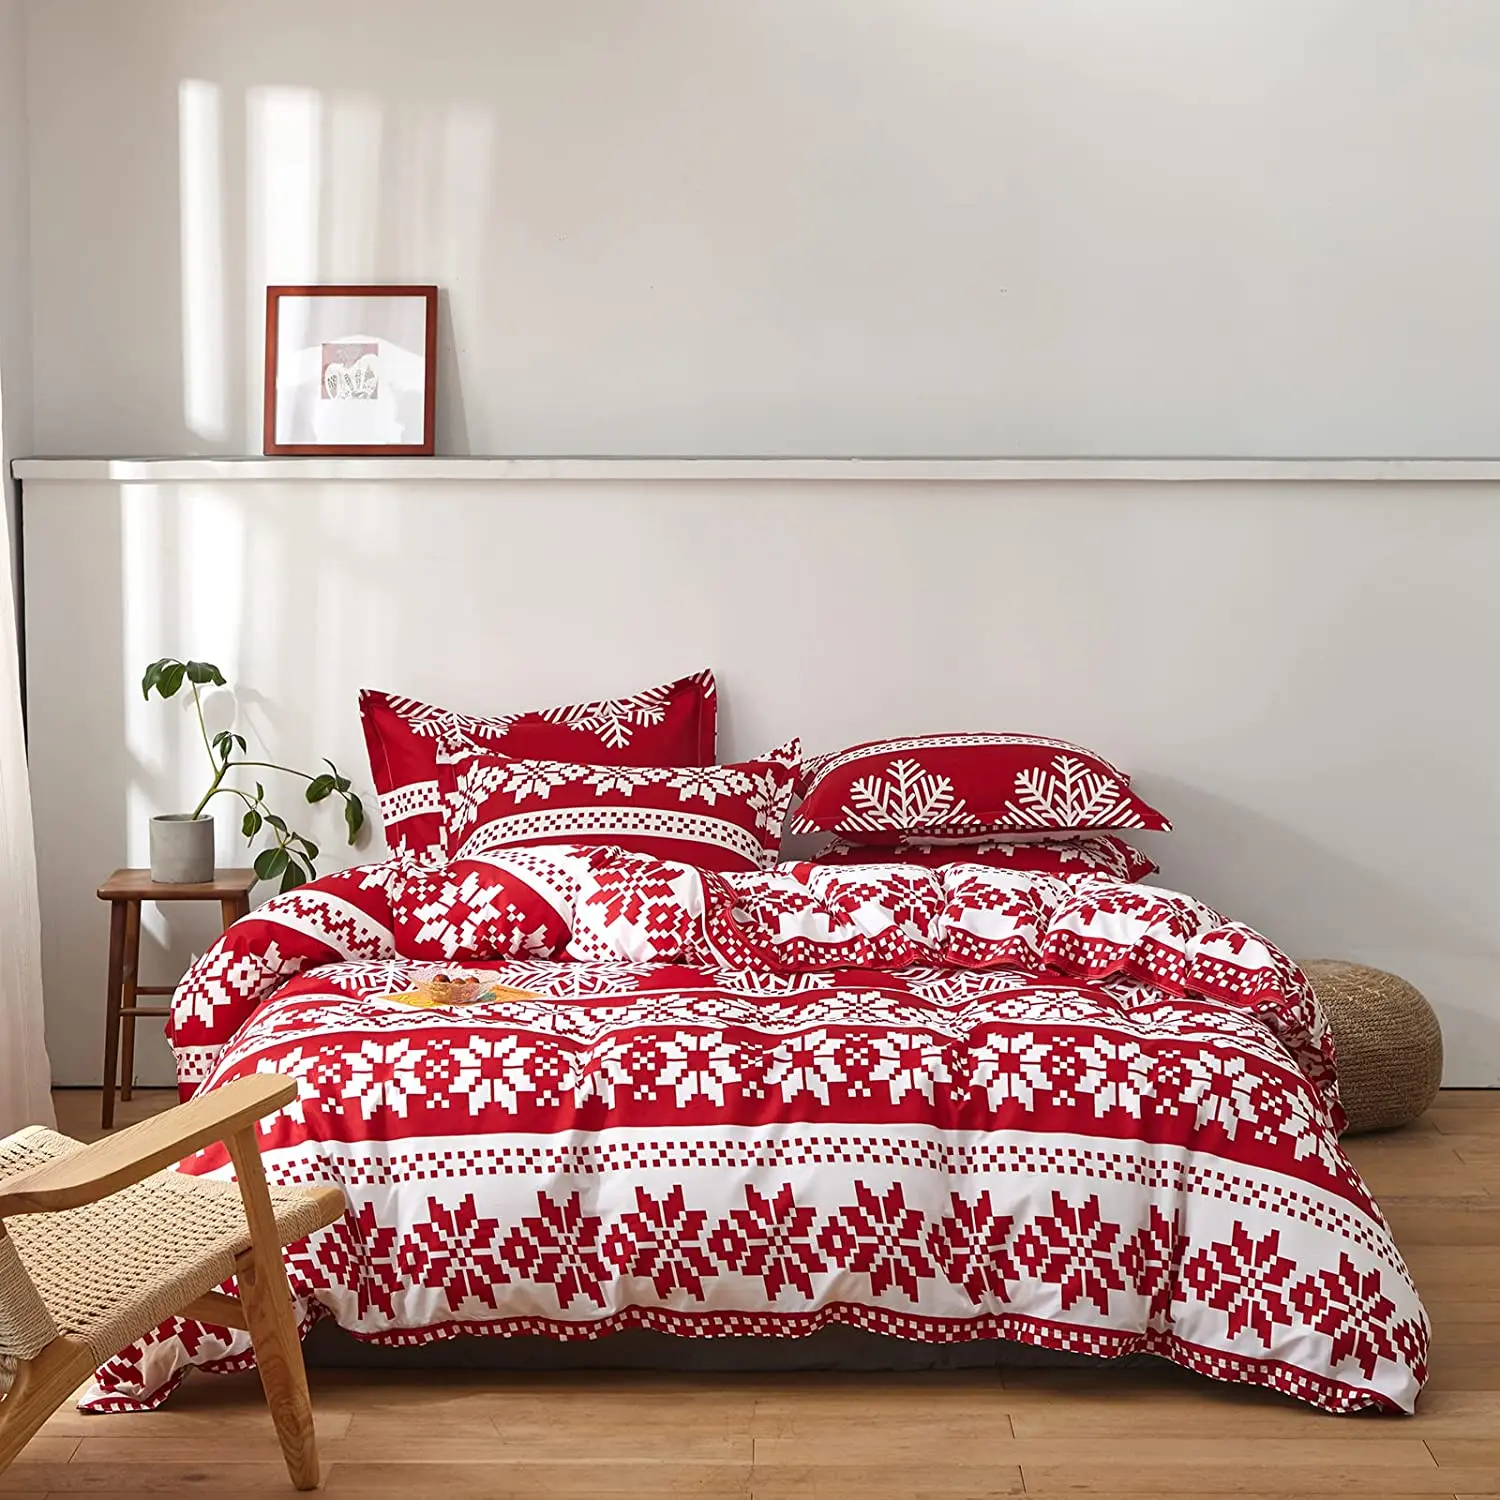 Christmas Red Duvet Cover Set with Red White Snowflake Style Bedding Set with Ties and Zipper Pillow Shams for New Year Gift